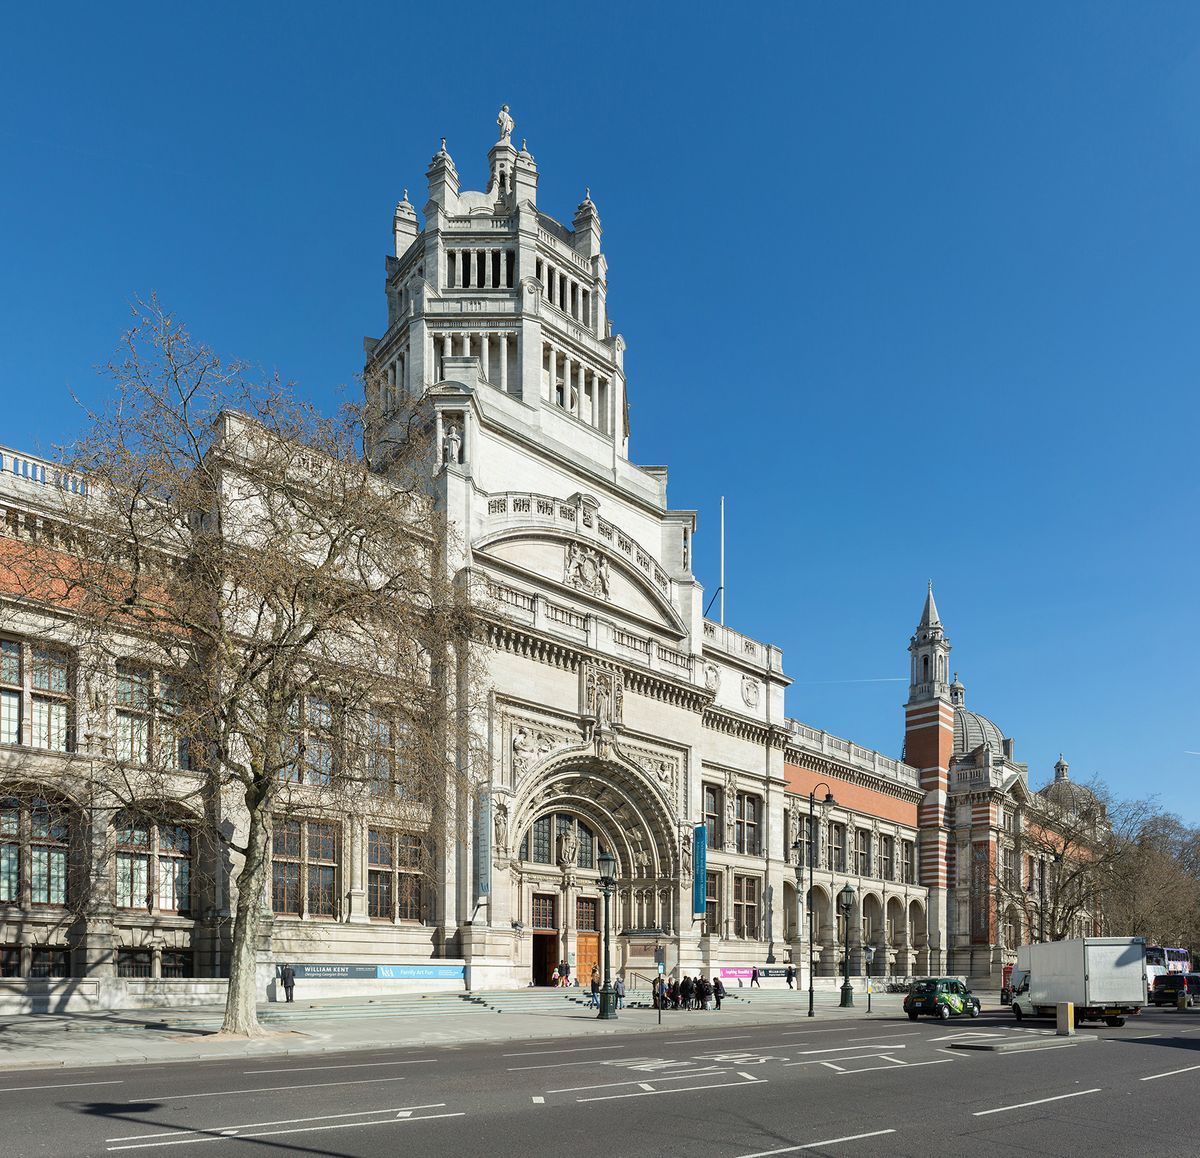 The Victoria and Albert Museum tweeted that it will close on Wednesday Photo: David Iliff